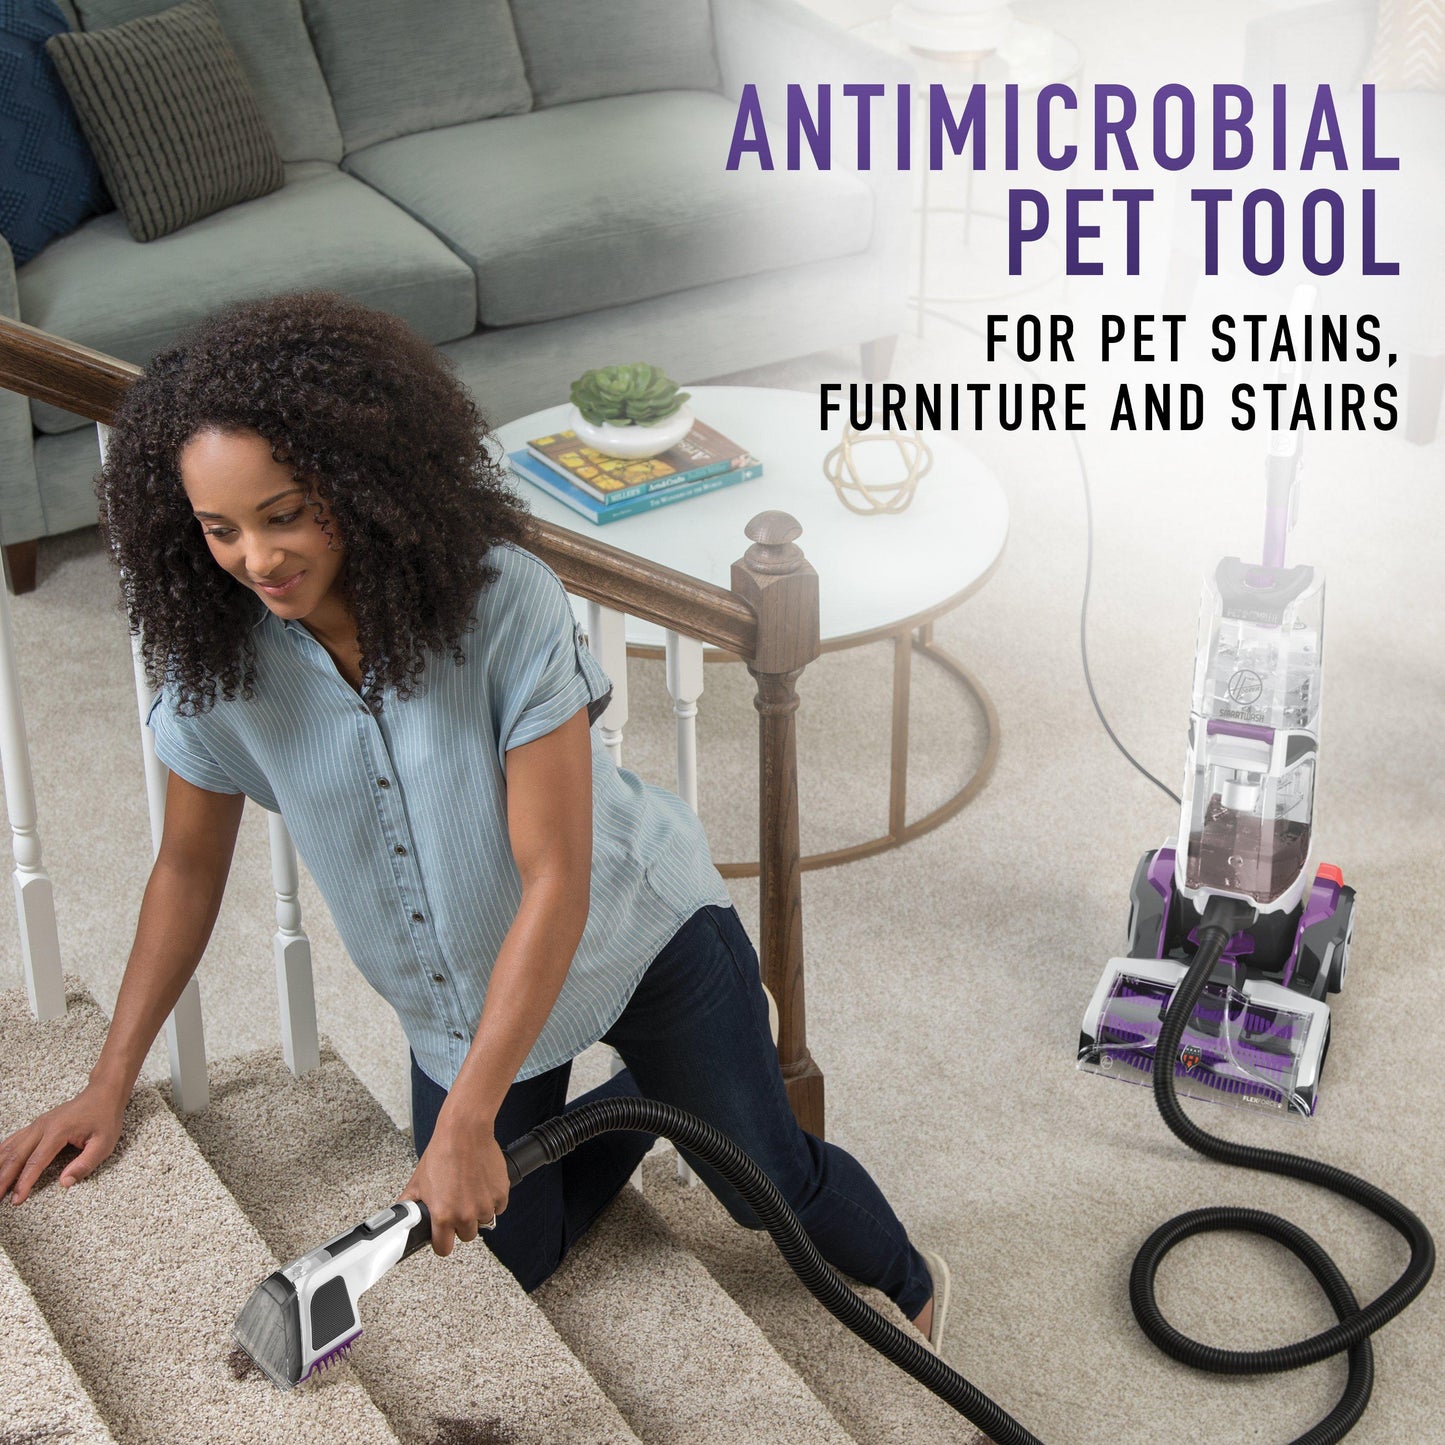 Woman uses the antimicrobial pet tool on SmartWash Pet to clean stains on carpeted steps